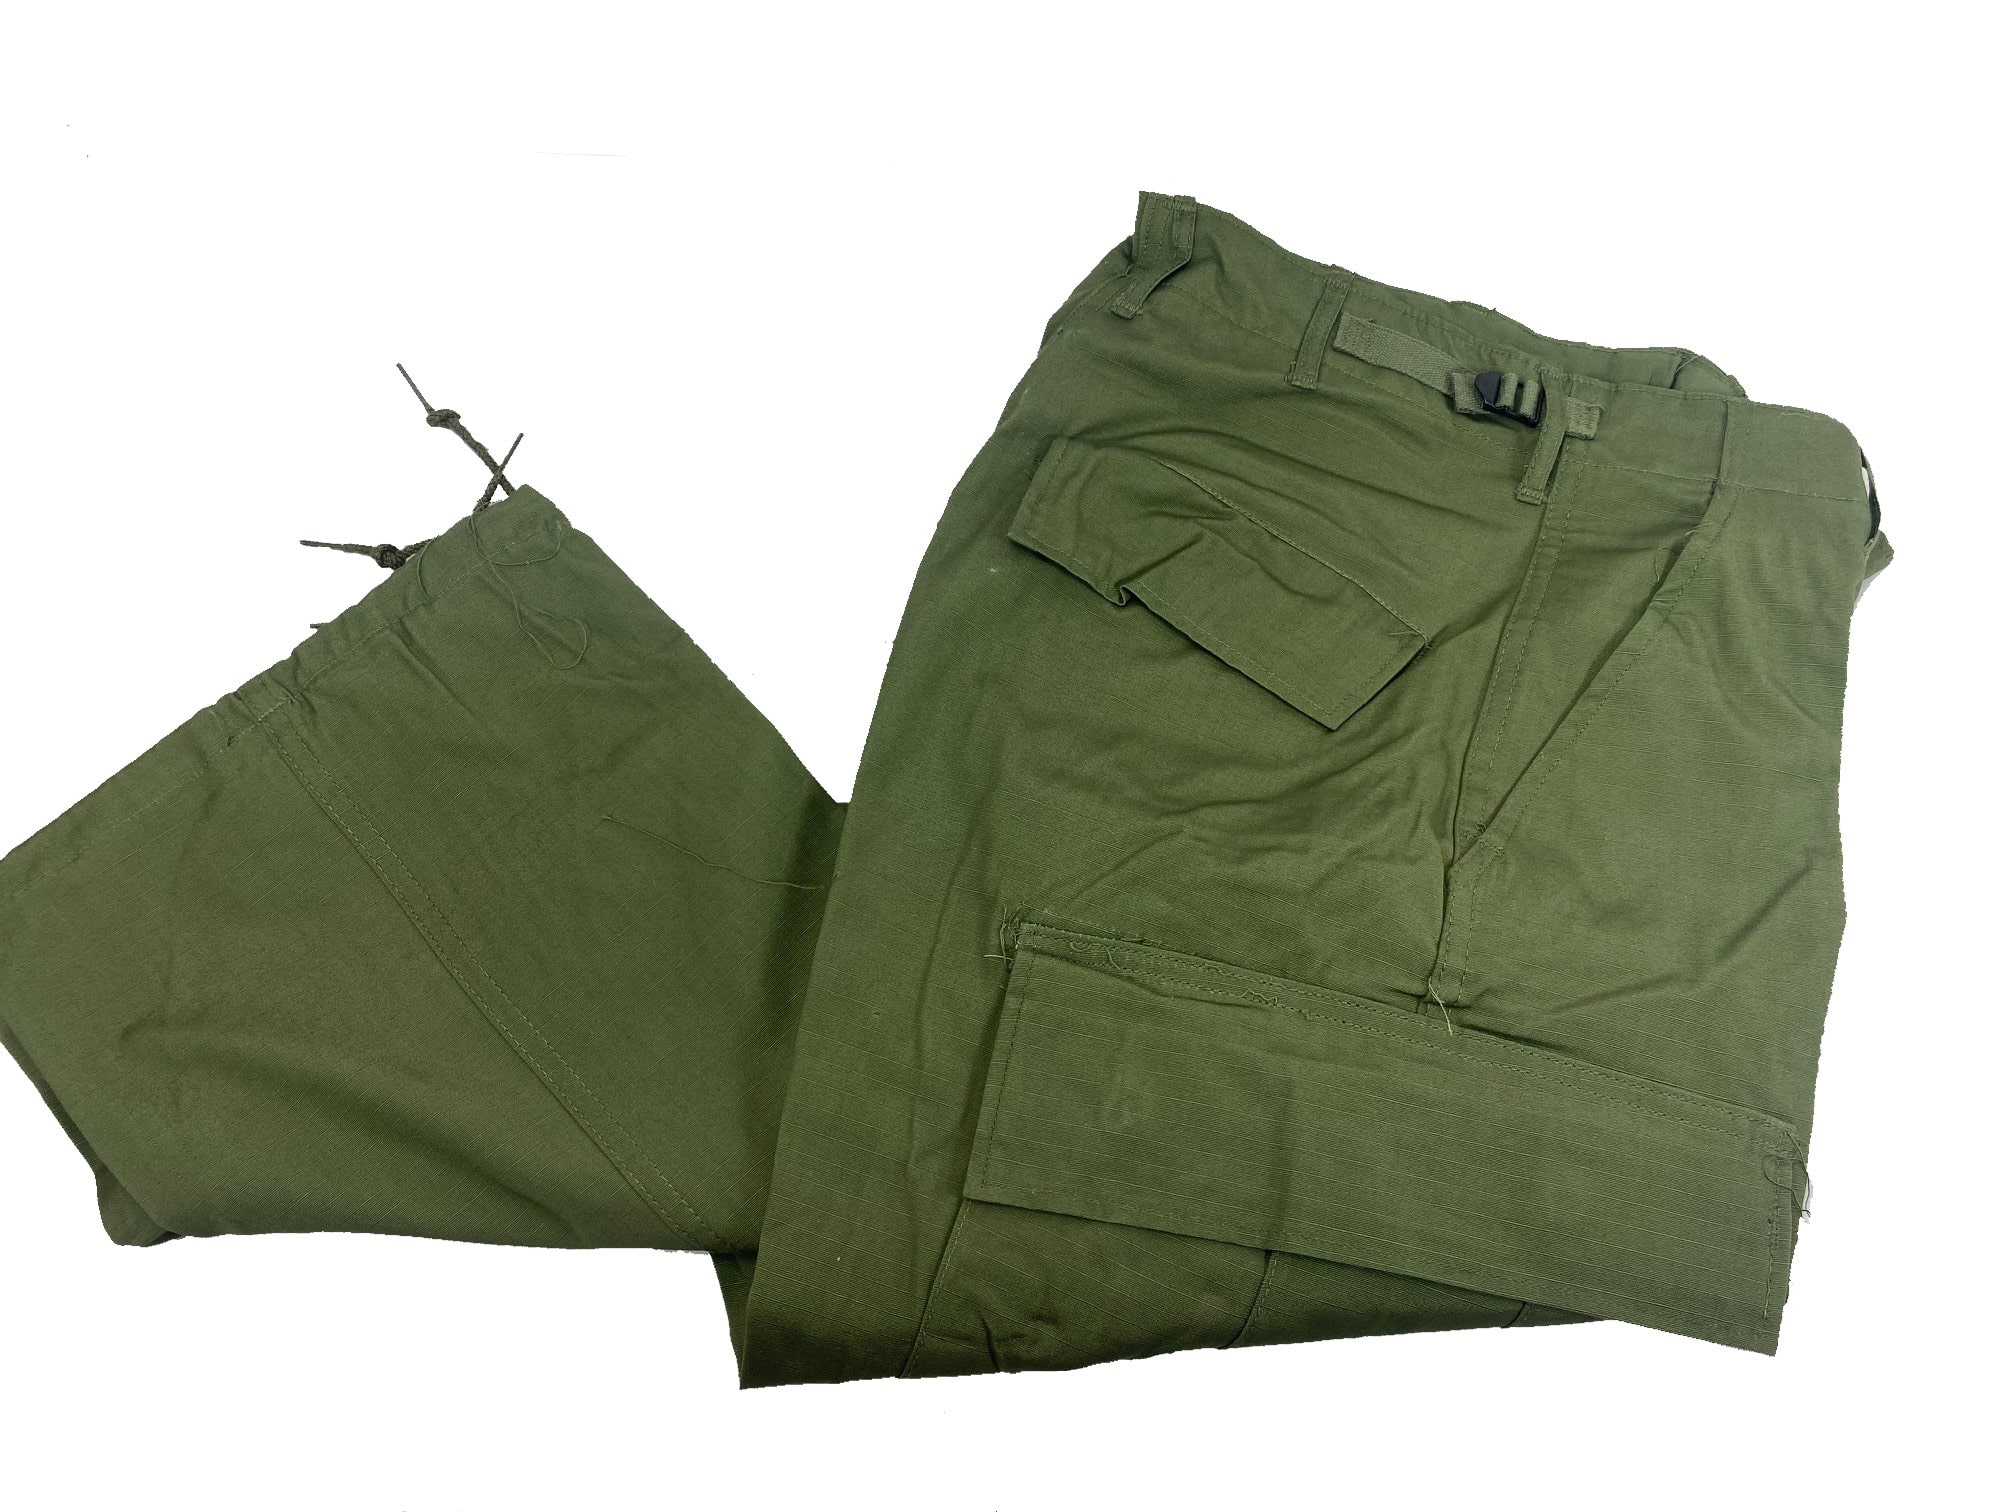 BMW jungle green soft breathable chino pants - Standard Clothing Store